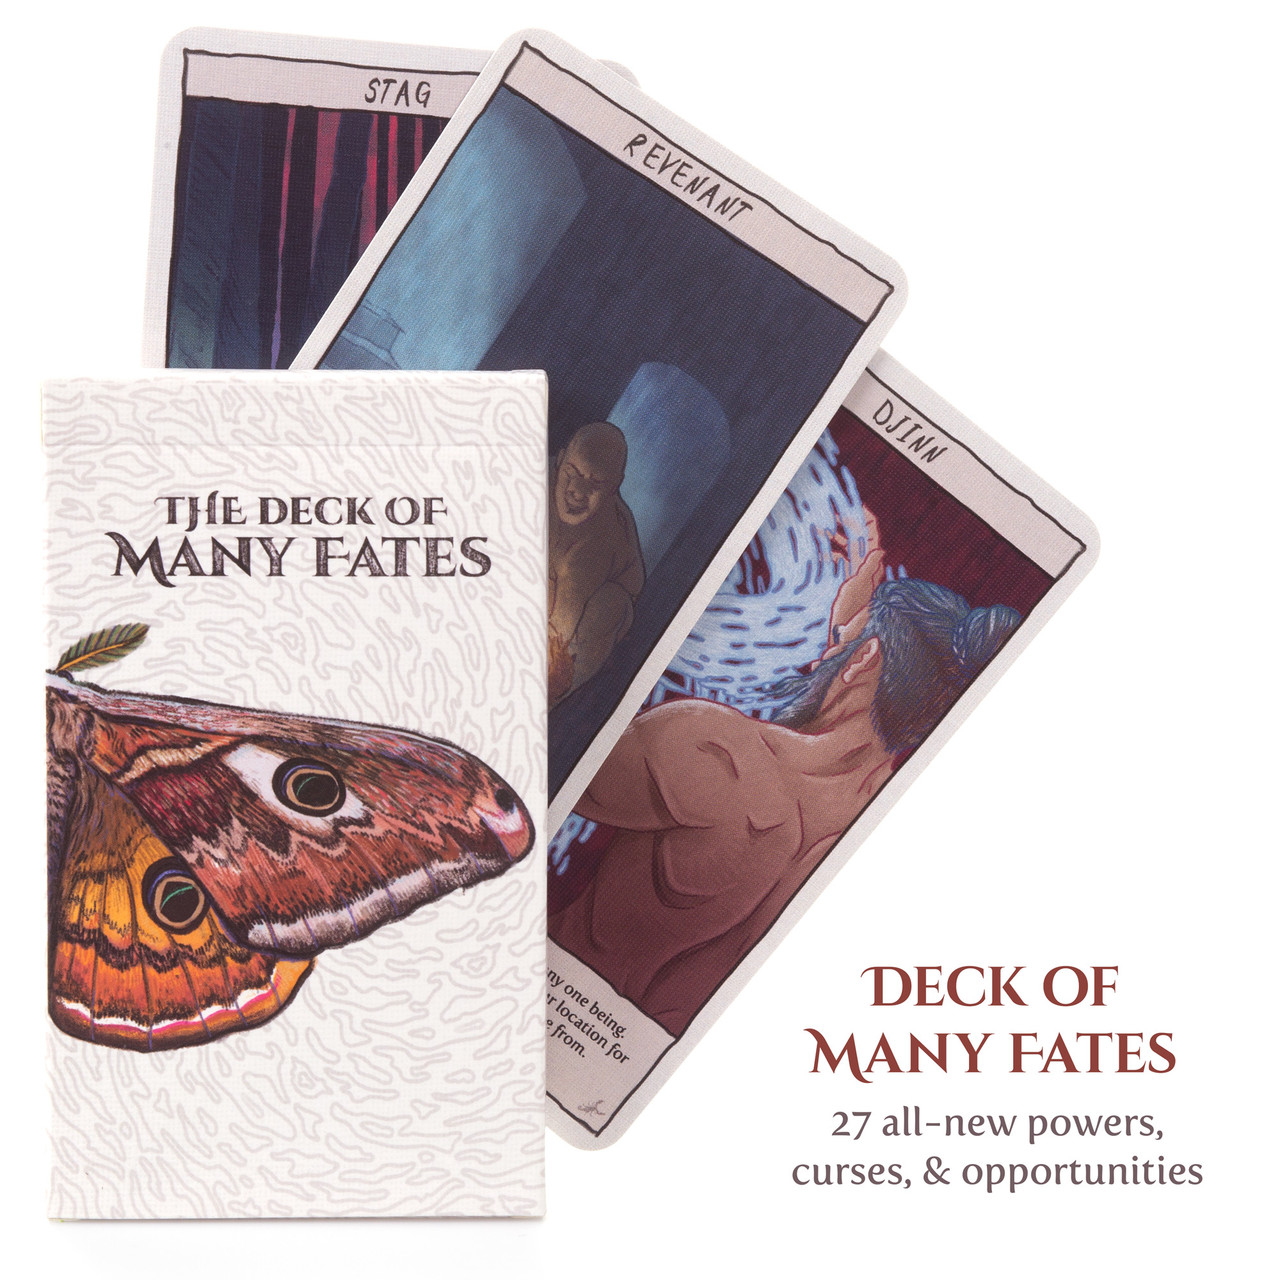  Deck of Many Things Includes The Book of Many Things